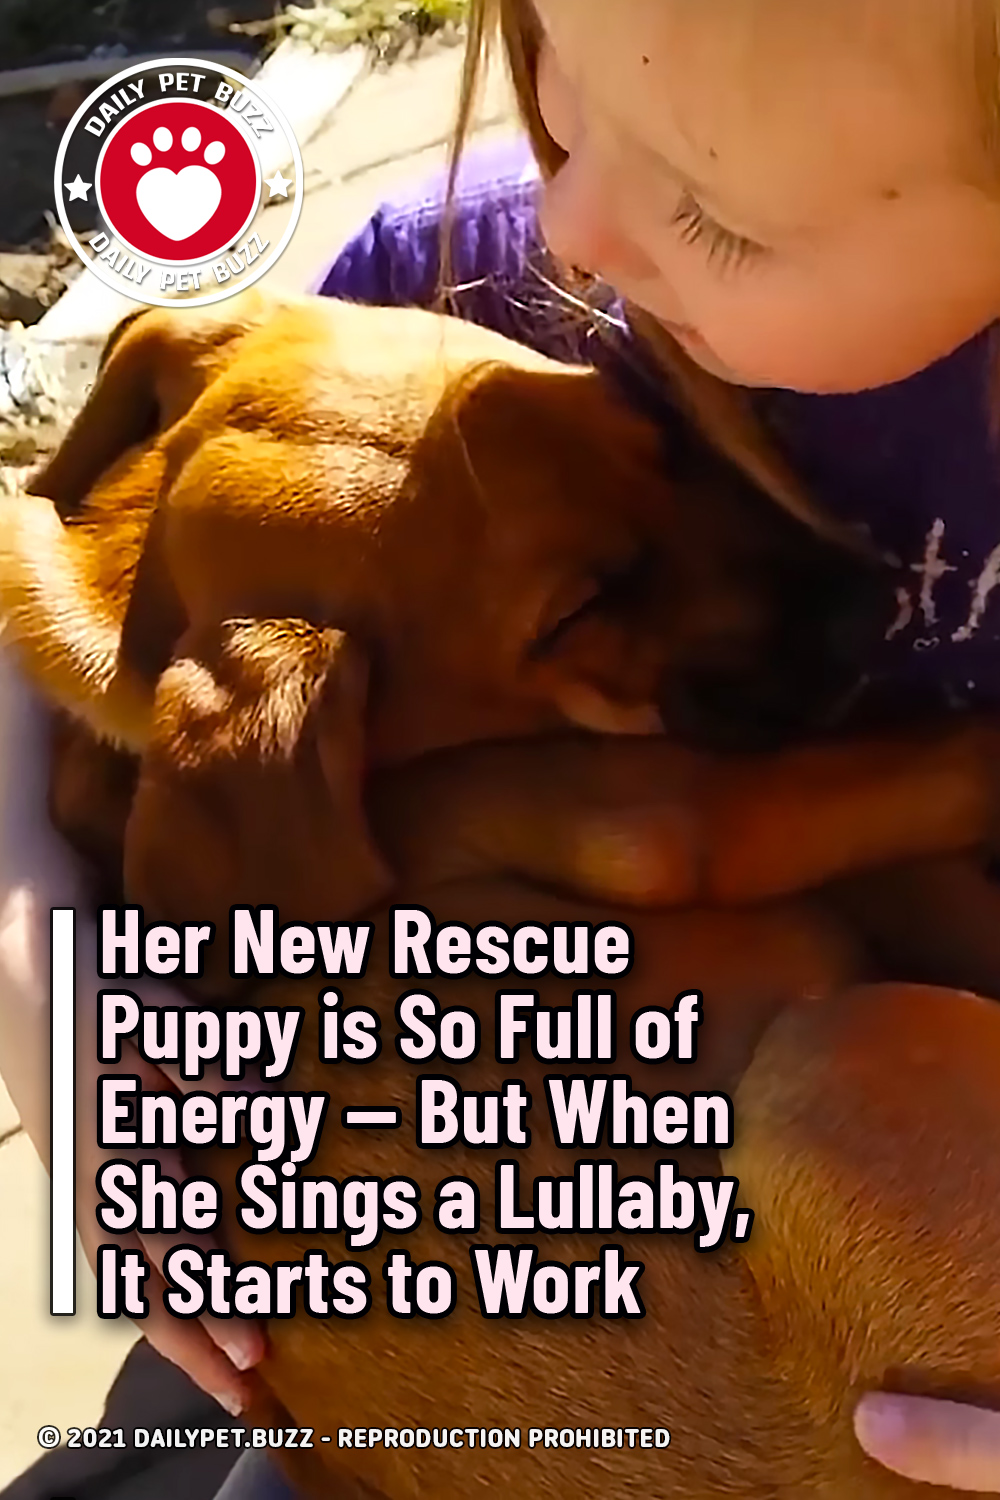 Her New Rescue Puppy is So Full of Energy -- But When She Sings a Lullaby, It Starts to Work